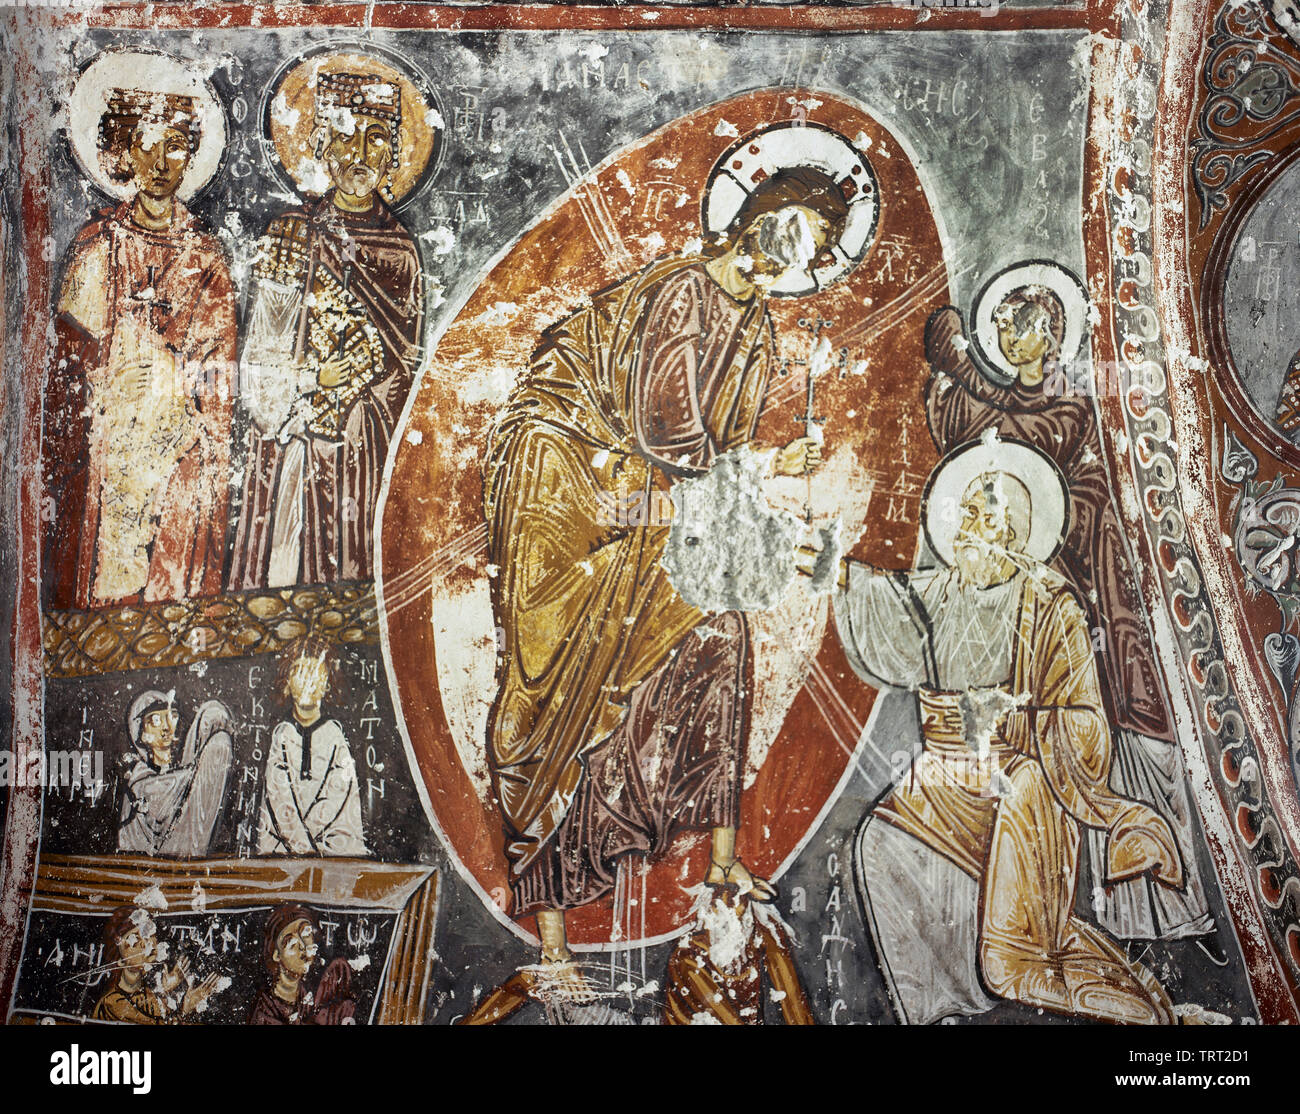 Turkey. Church of Saint Barbara. Built in 11th century. It was dedicated to the Christian martyr. Painting depicting a scene from the life of Jesus. Soganli Valley. Cappadocia. Stock Photo